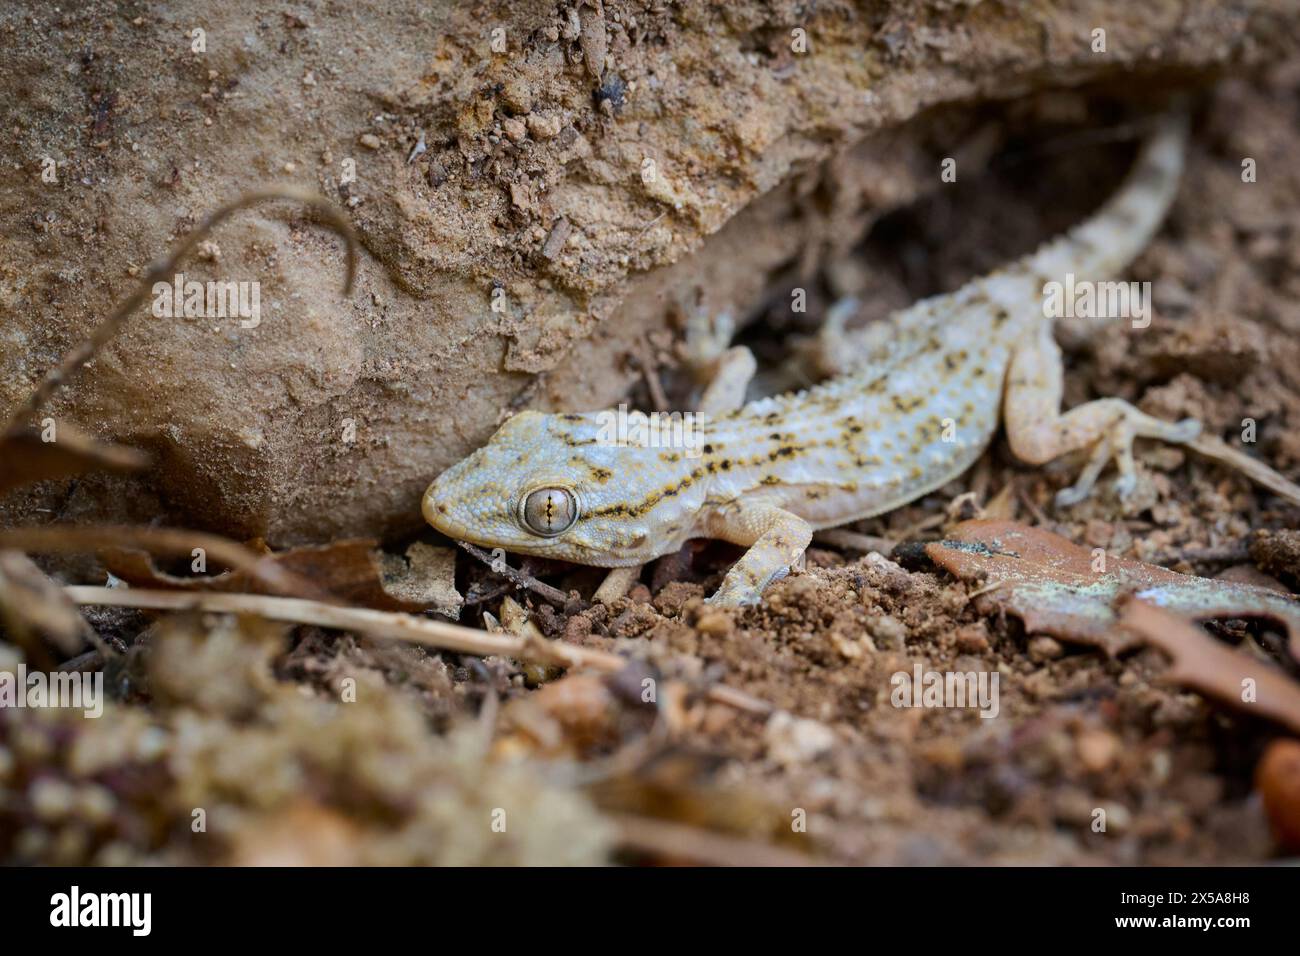 A Tarentola mauritanica gecko, also known as the Moorish wall gecko, is camouflaged against soil and rocks in its natural habitat. Stock Photo